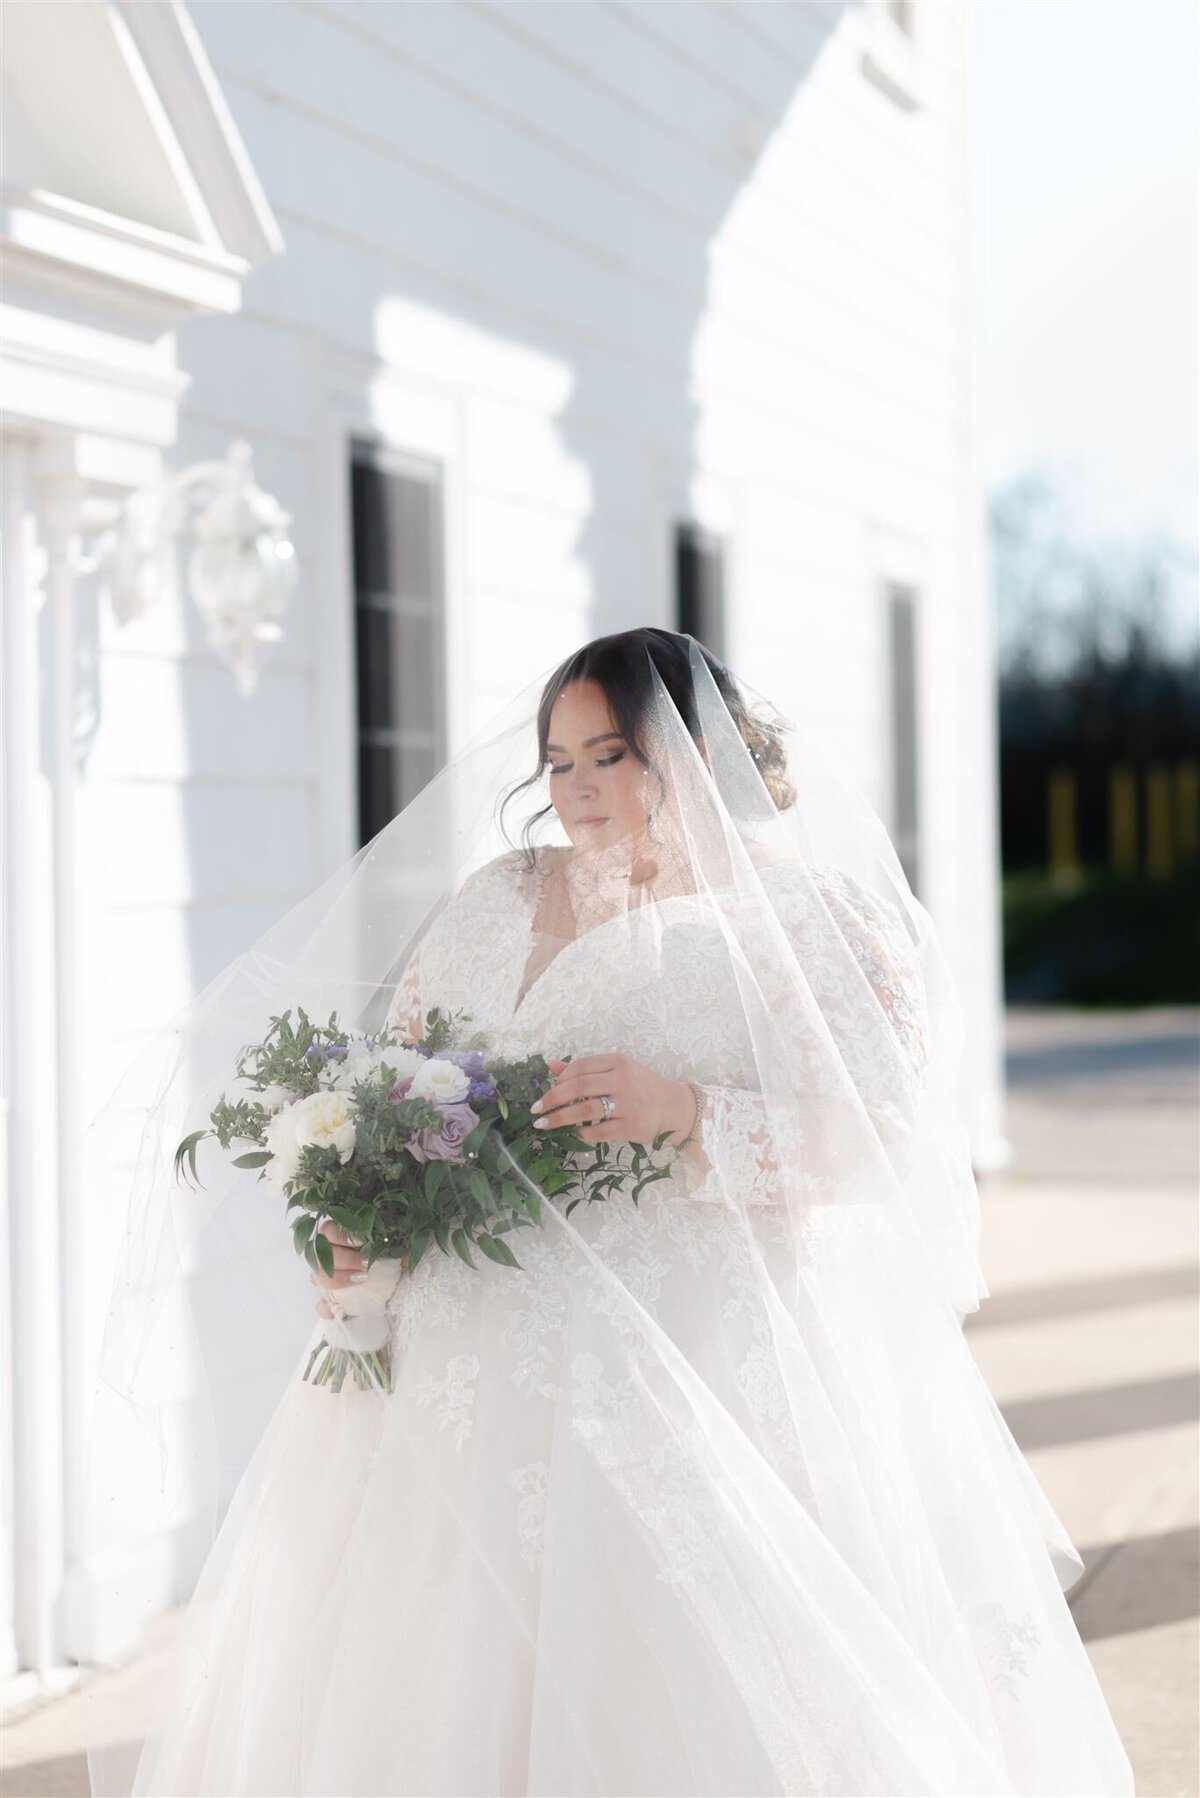 Beautiful Bride with her Veil over her looking at her wedding flowers